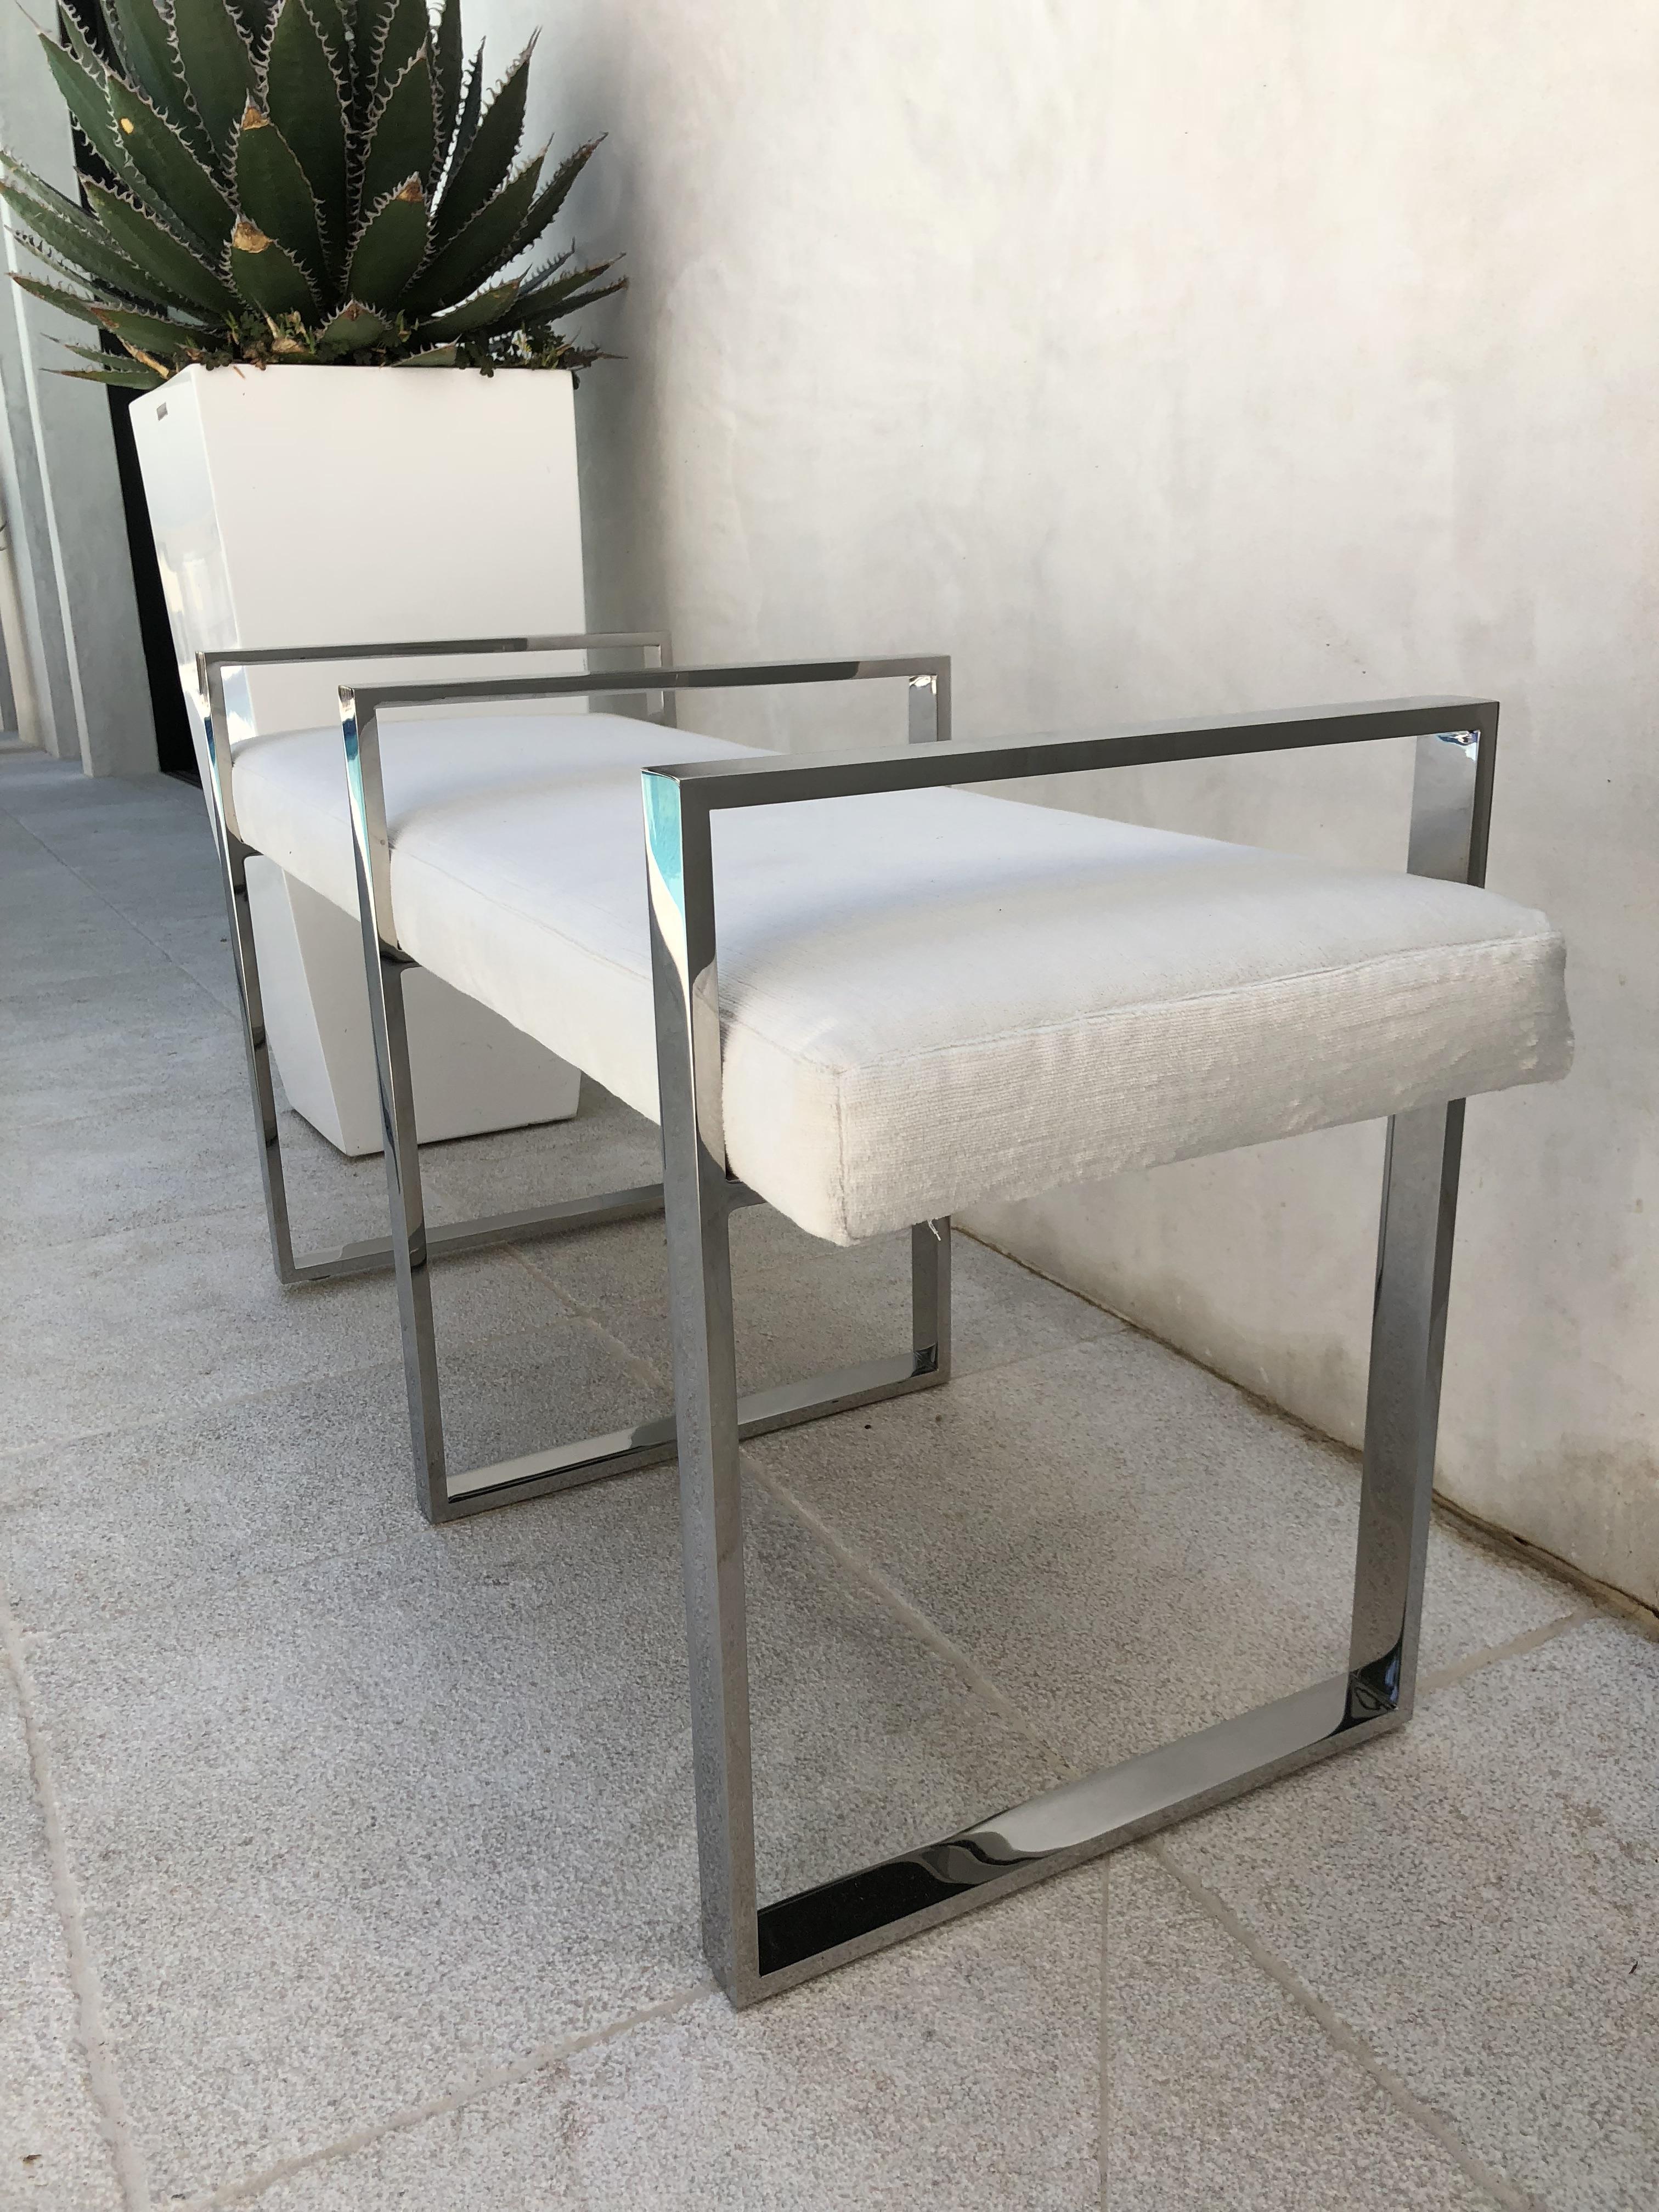 Beautiful and modern bench executed in stainless steel and manufactured by Cain Modern as part of the Triple rectangle line.
The bench is very modern and it can be customized both in size and materials, we currently have one in stainless steel, one